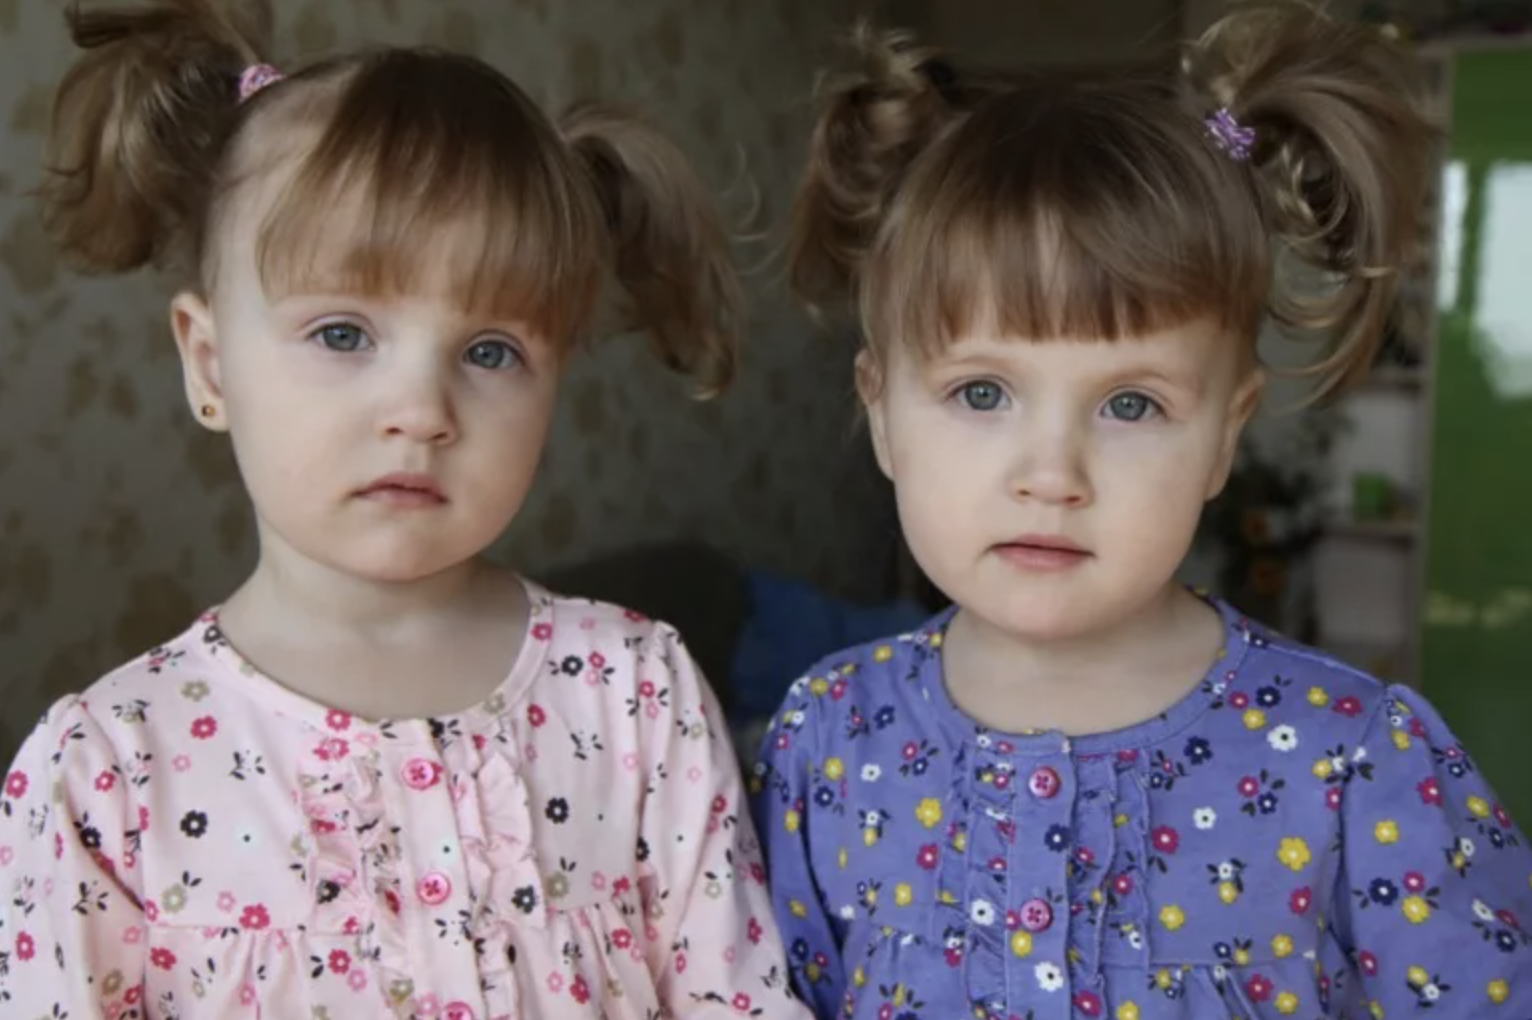 Two identical looking girls | Source: Shutterstock